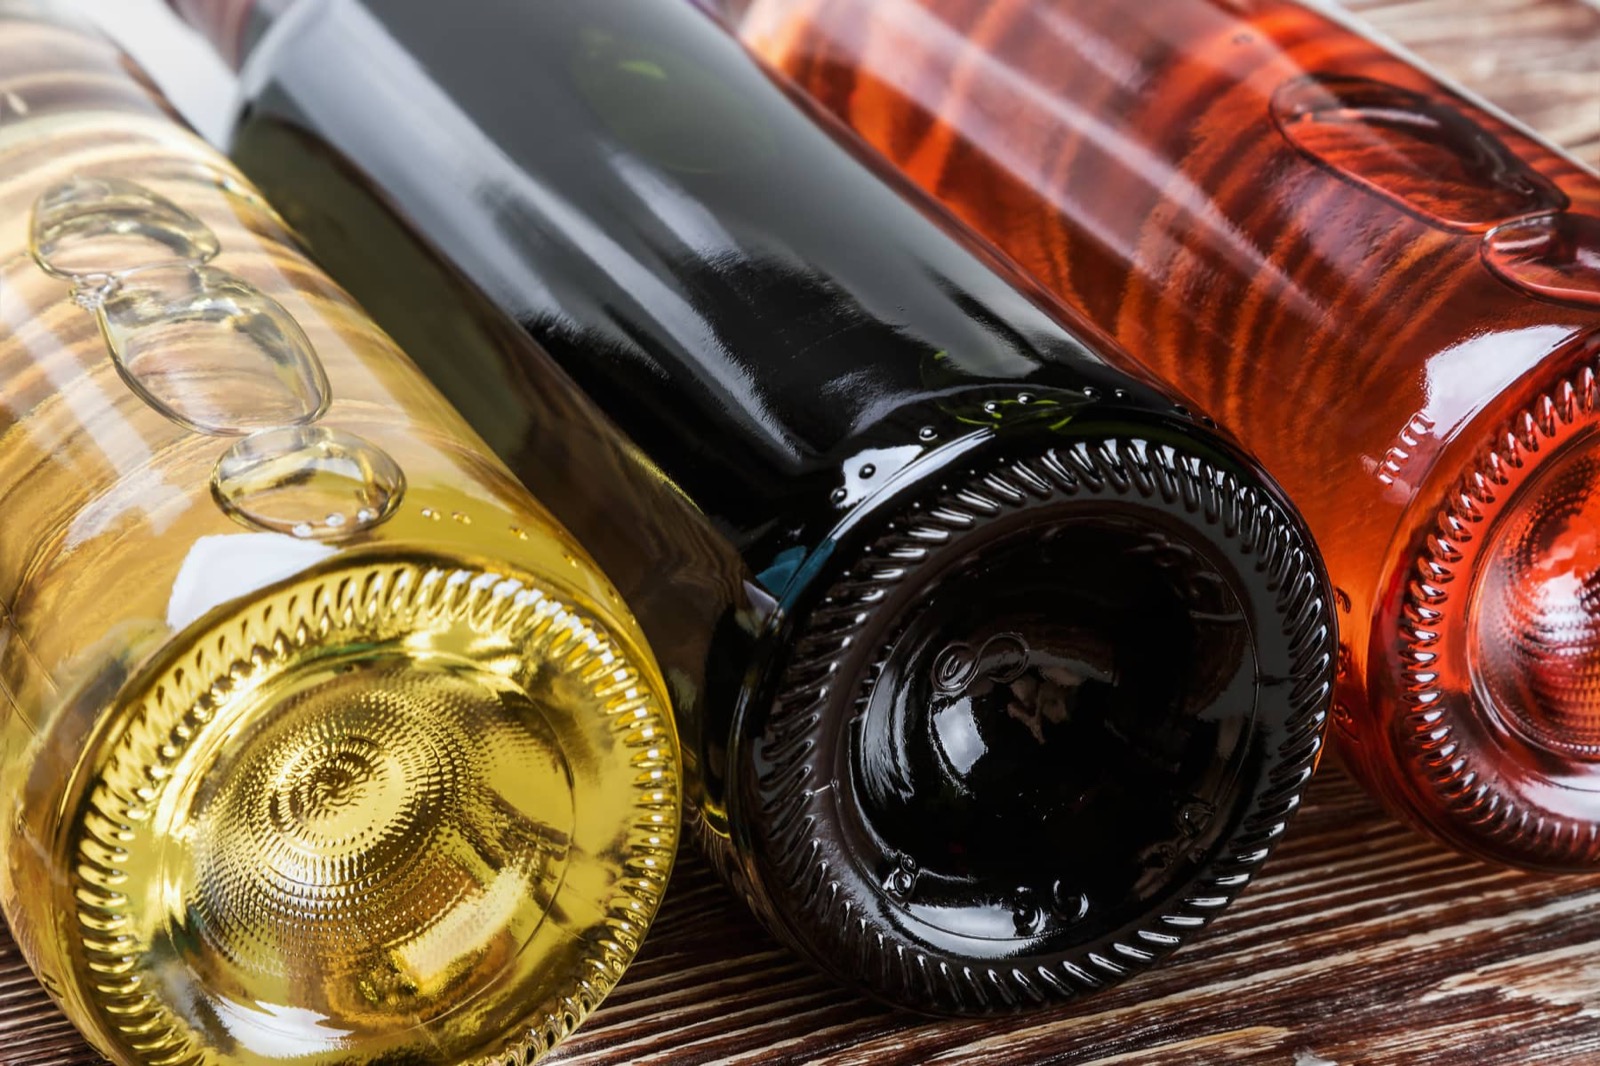 Do You Actually Know The Official Names Of These Everyday Items? Wine bottle bottom punt